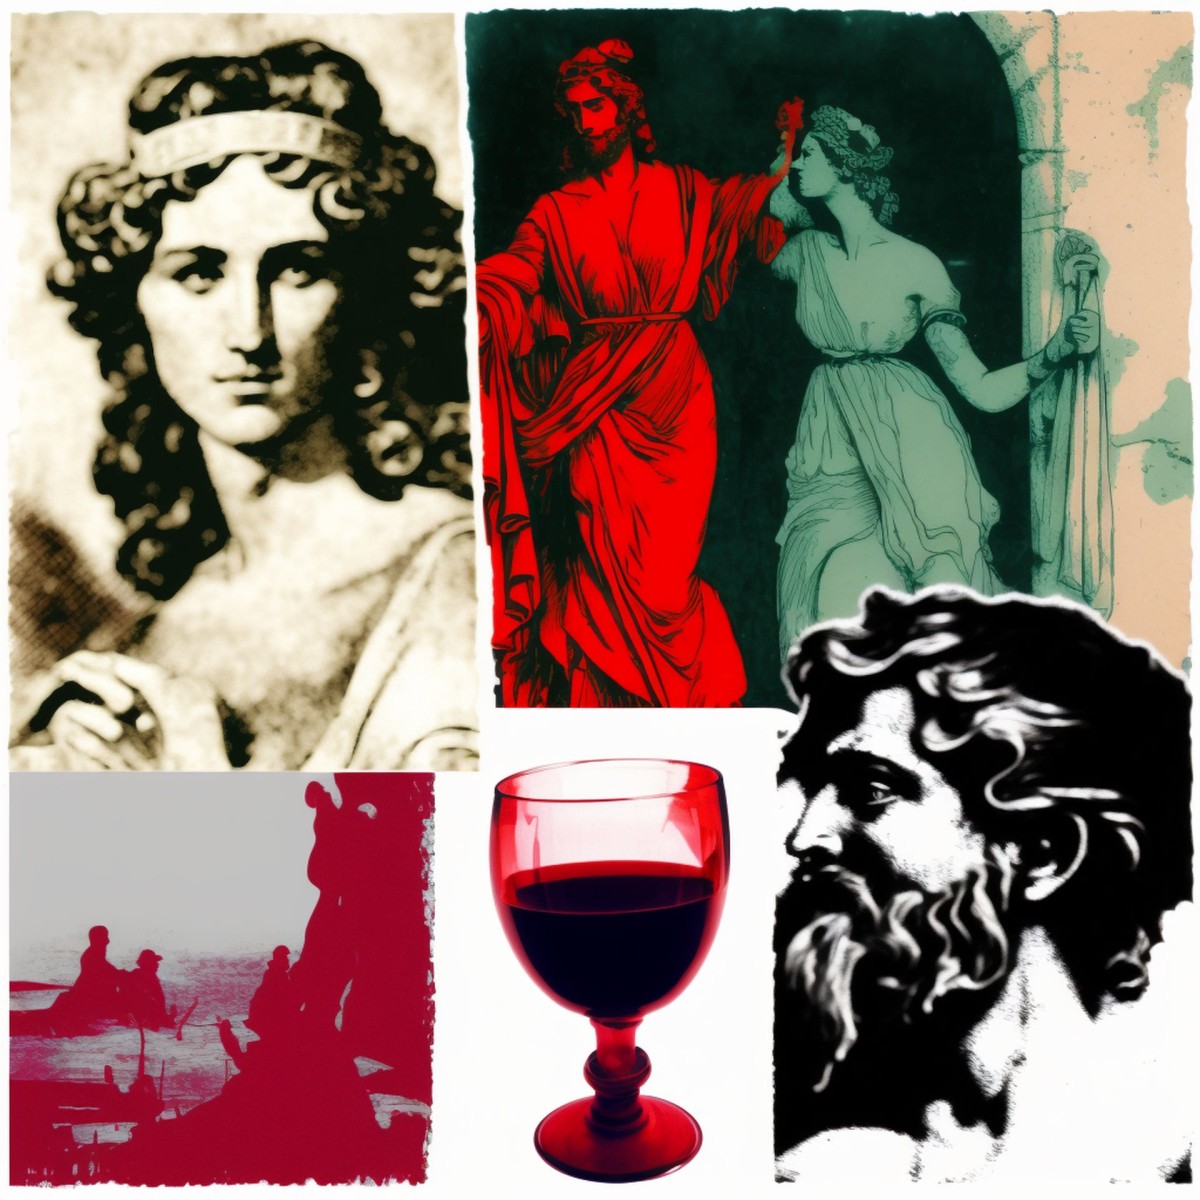 meaning of dreaming of red wine: A collage of red wine dreams in literature and folklore: a romantic scene with a couple sharing red wine symbolizing love and passion, an illustration of Odysseus tricking the Cyclops with wine from 'The Odyssey', a haunting image of Lady Macbeth with a goblet of red wine symbolizing guilt from 'Macbeth', a depiction of Dionysus, the Greek god of wine, in a joyous yet chaotic setting, a magical scene from a European folk tale where wine acts as an elixir of life, a somber café in Paris from 'The Sun Also Rises' with characters contemplating over wine, and a nostalgic scene from 'Brideshead Revisited' with a protagonist reminiscing over a glass of wine, all blended in a dreamy, artistic, and symbolic style